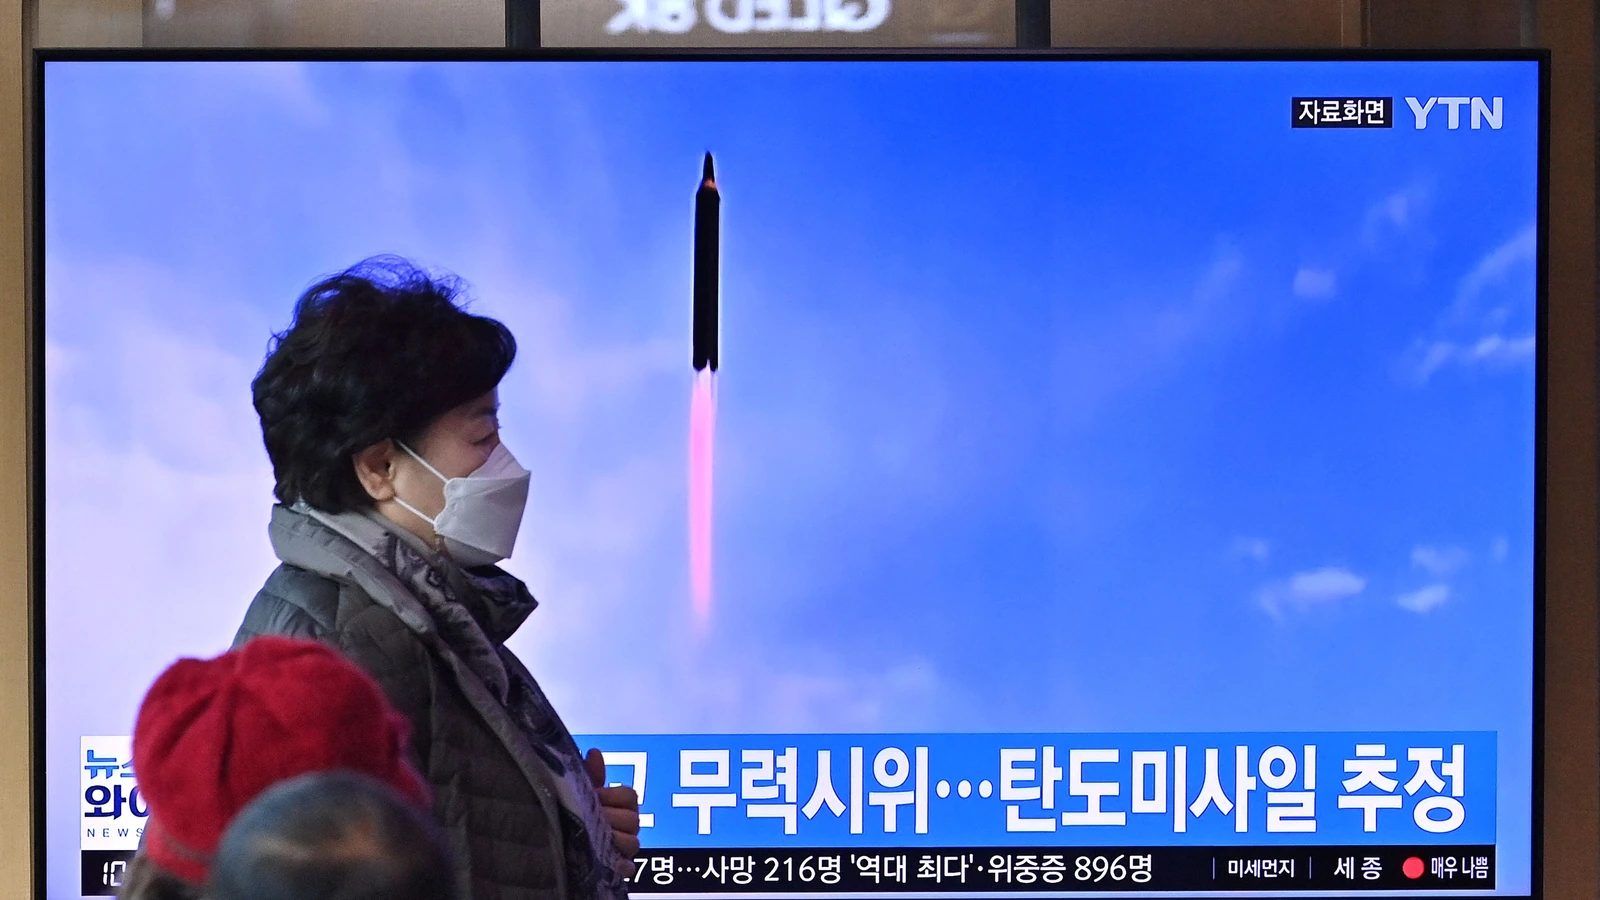 North Korea claims new test of ‘reconnaissance satellite’ component